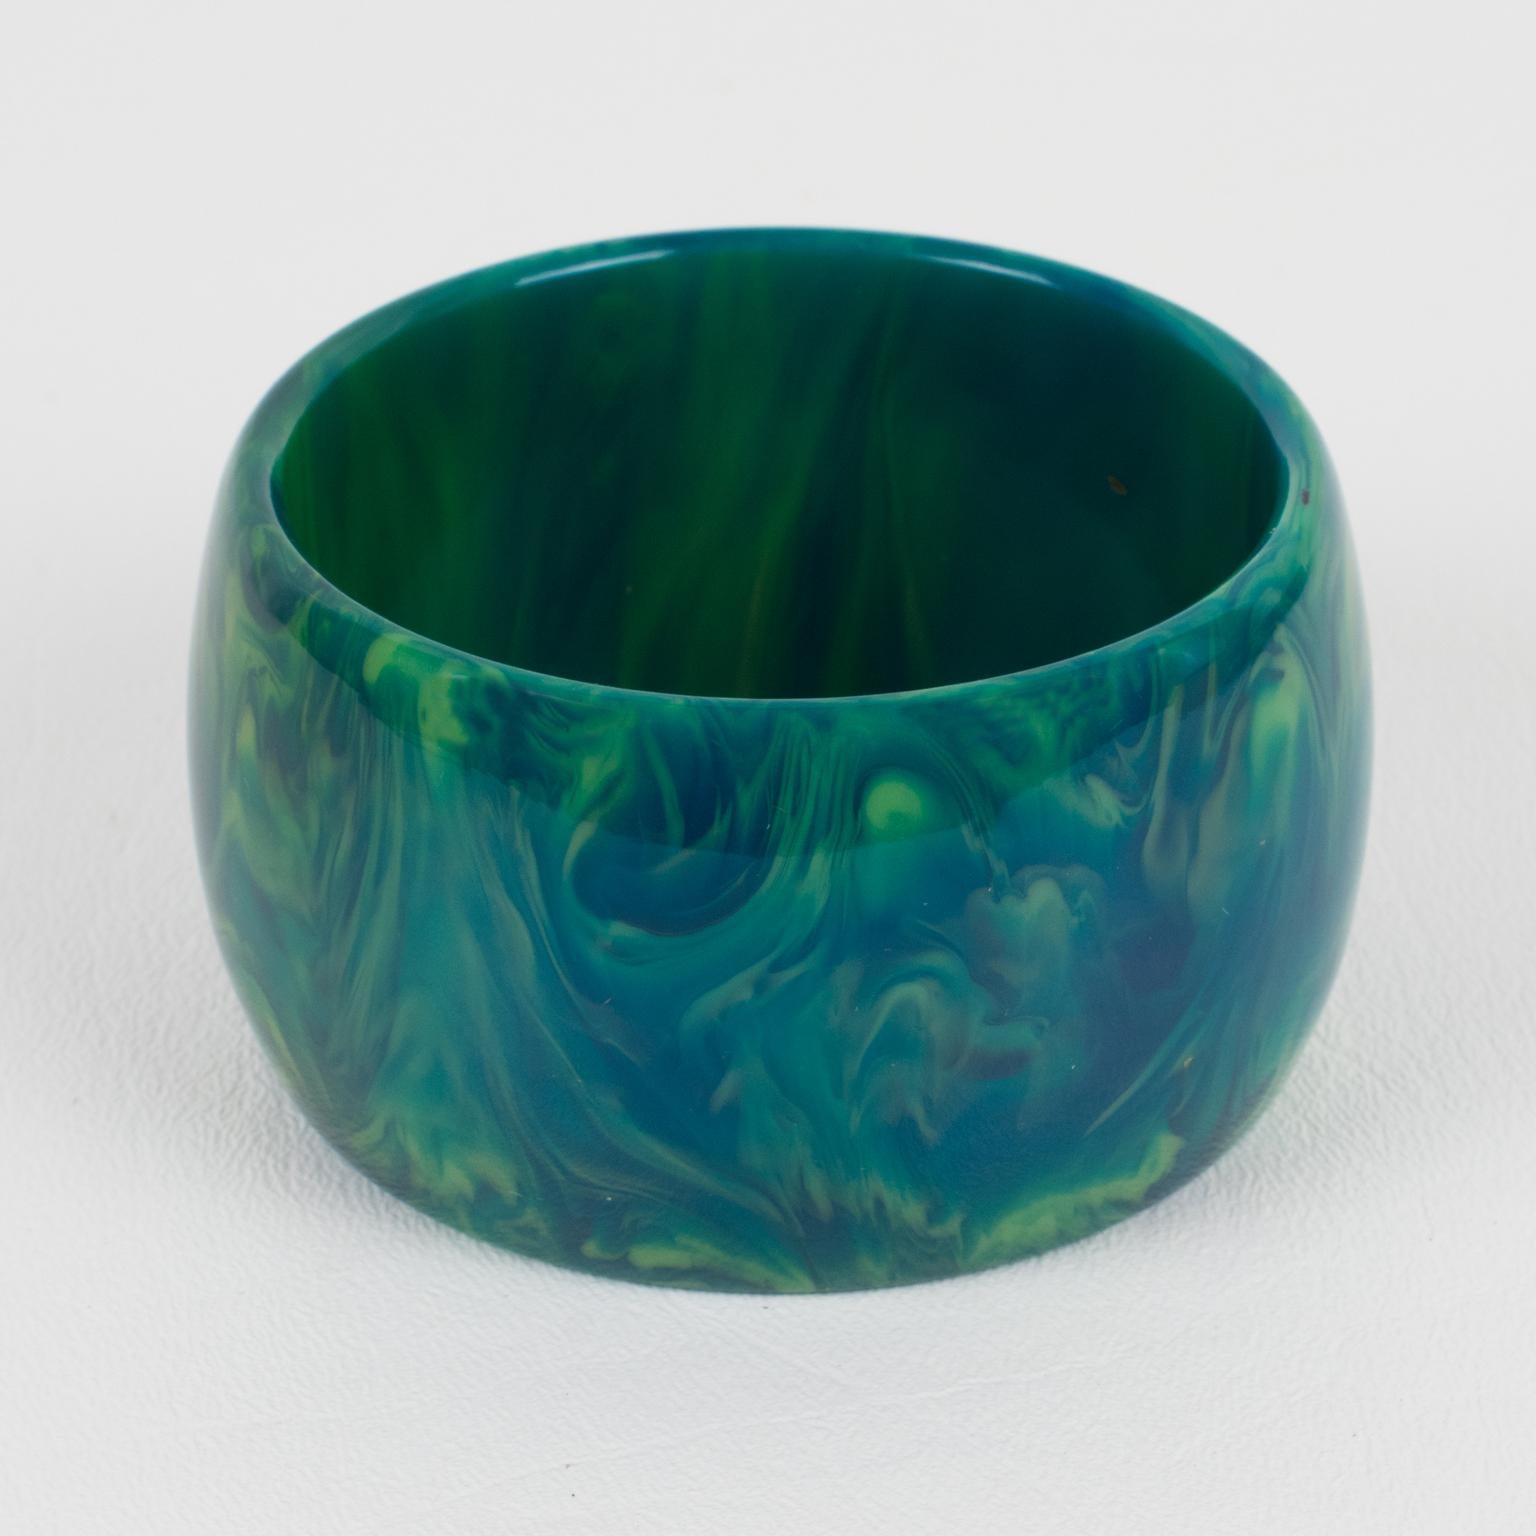 Gorgeous oversized blue-moon marble Bakelite bracelet bangle. Chunky wide domed shape. Intense blue marble tone with green and white cloudy swirling. 
Measurements: Inside across is 2.50 in. diameter (6.3 cm) - outside across is 3.07 in. diameter